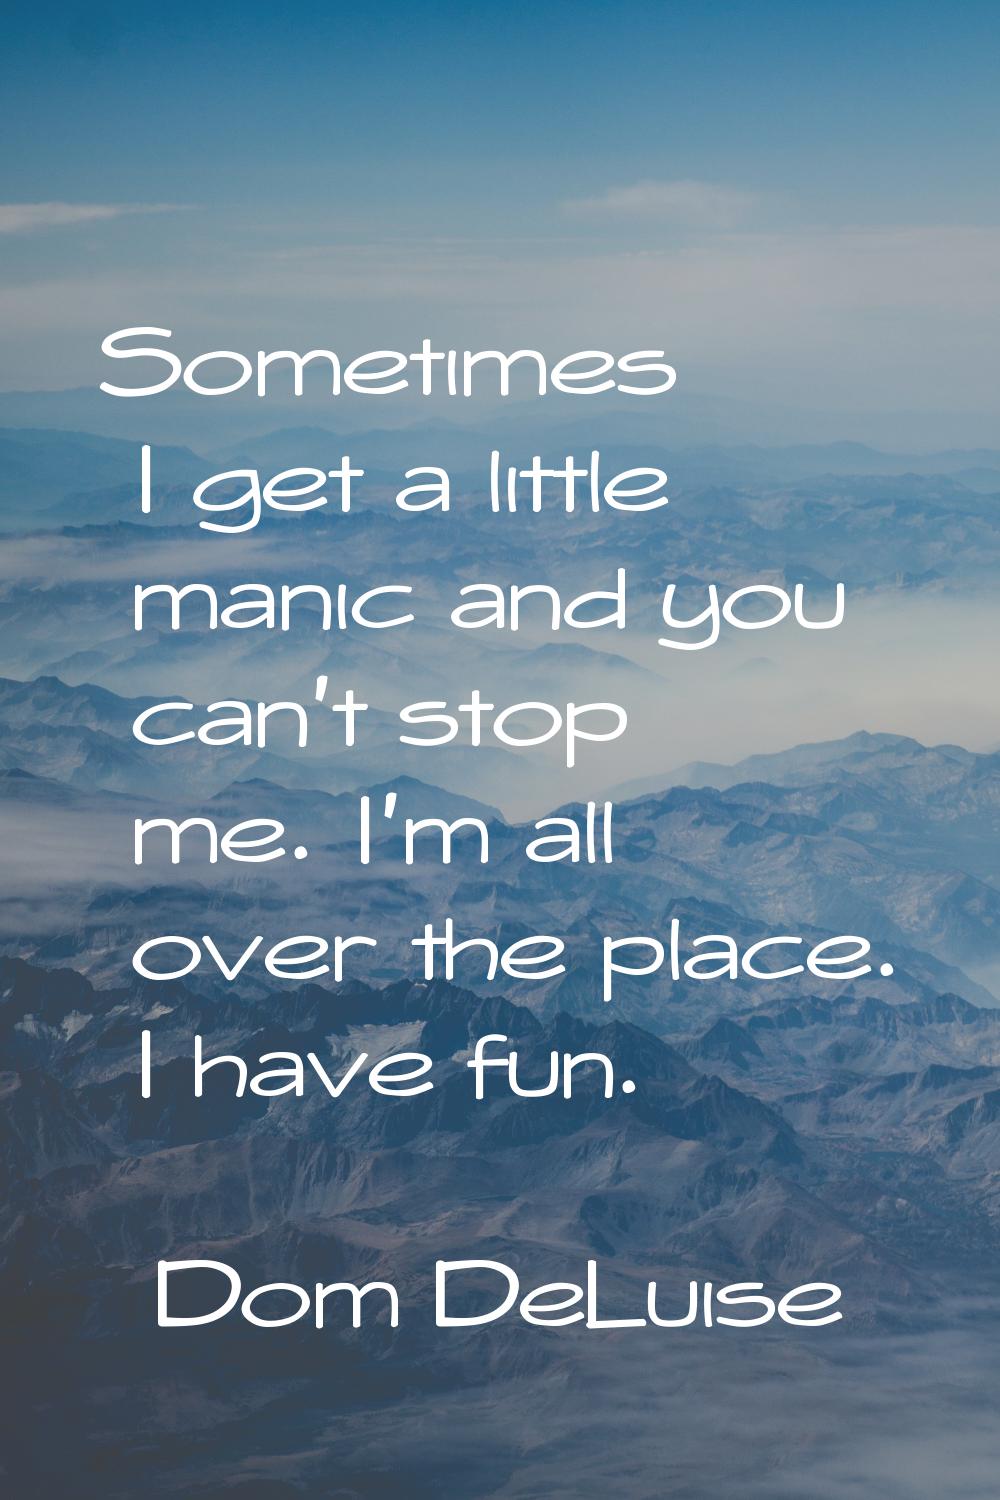 Sometimes I get a little manic and you can't stop me. I'm all over the place. I have fun.